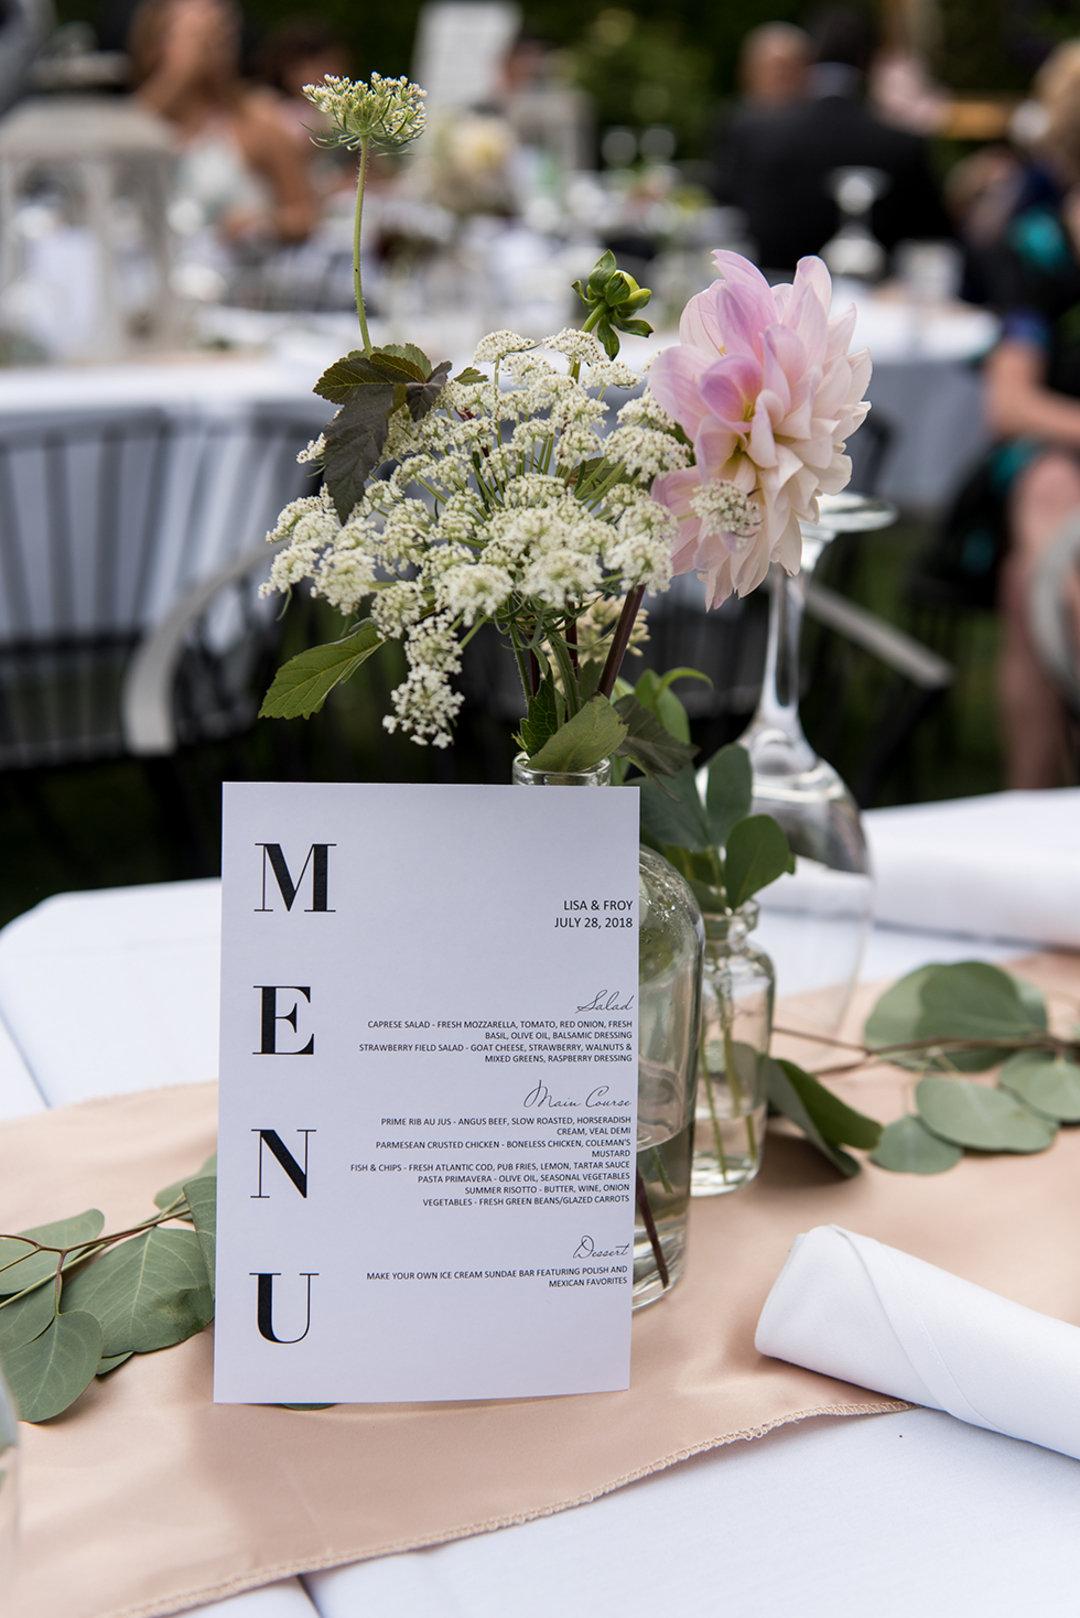 Pale pink dahlia with Queen Anne's lace at summer wedding in Chicago.